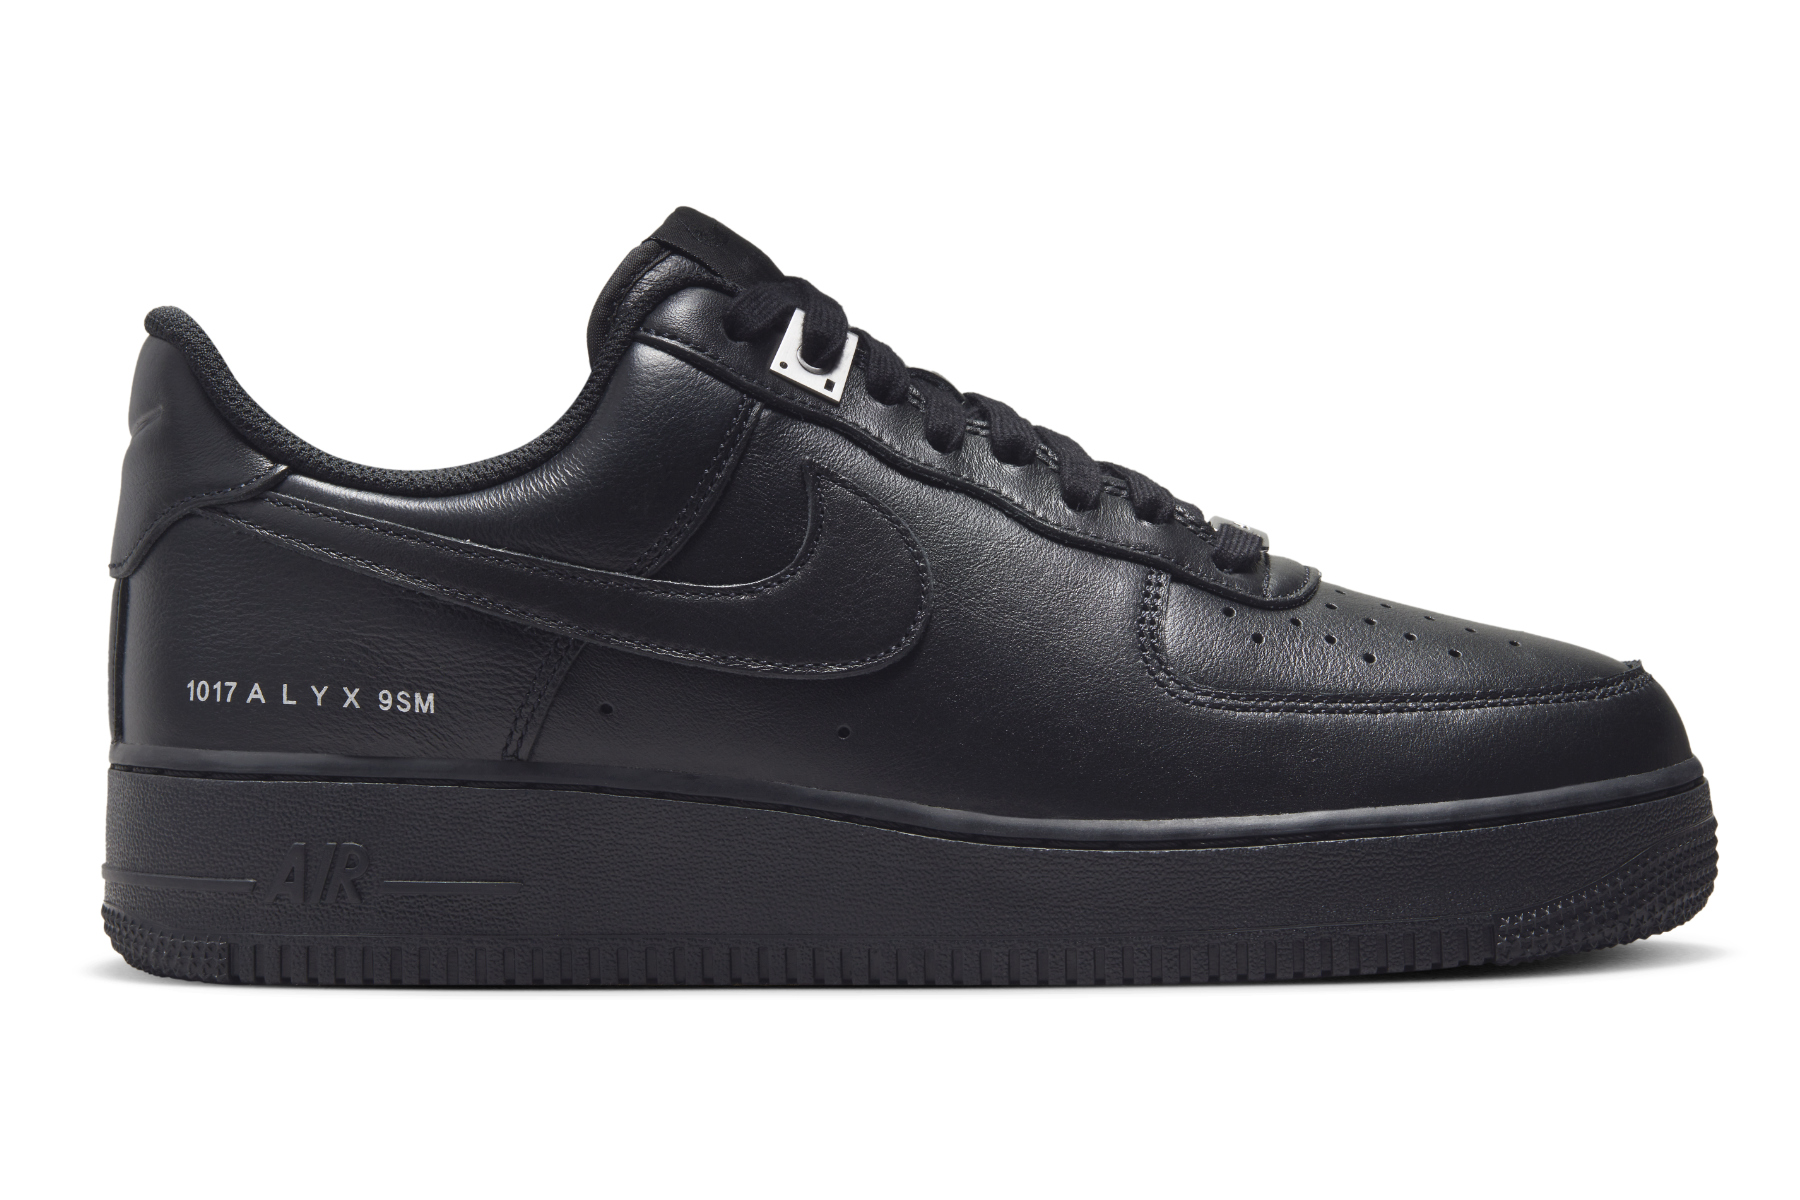 Matthew Williams' ALYX Nike AF1 Low Sneakers Are Here